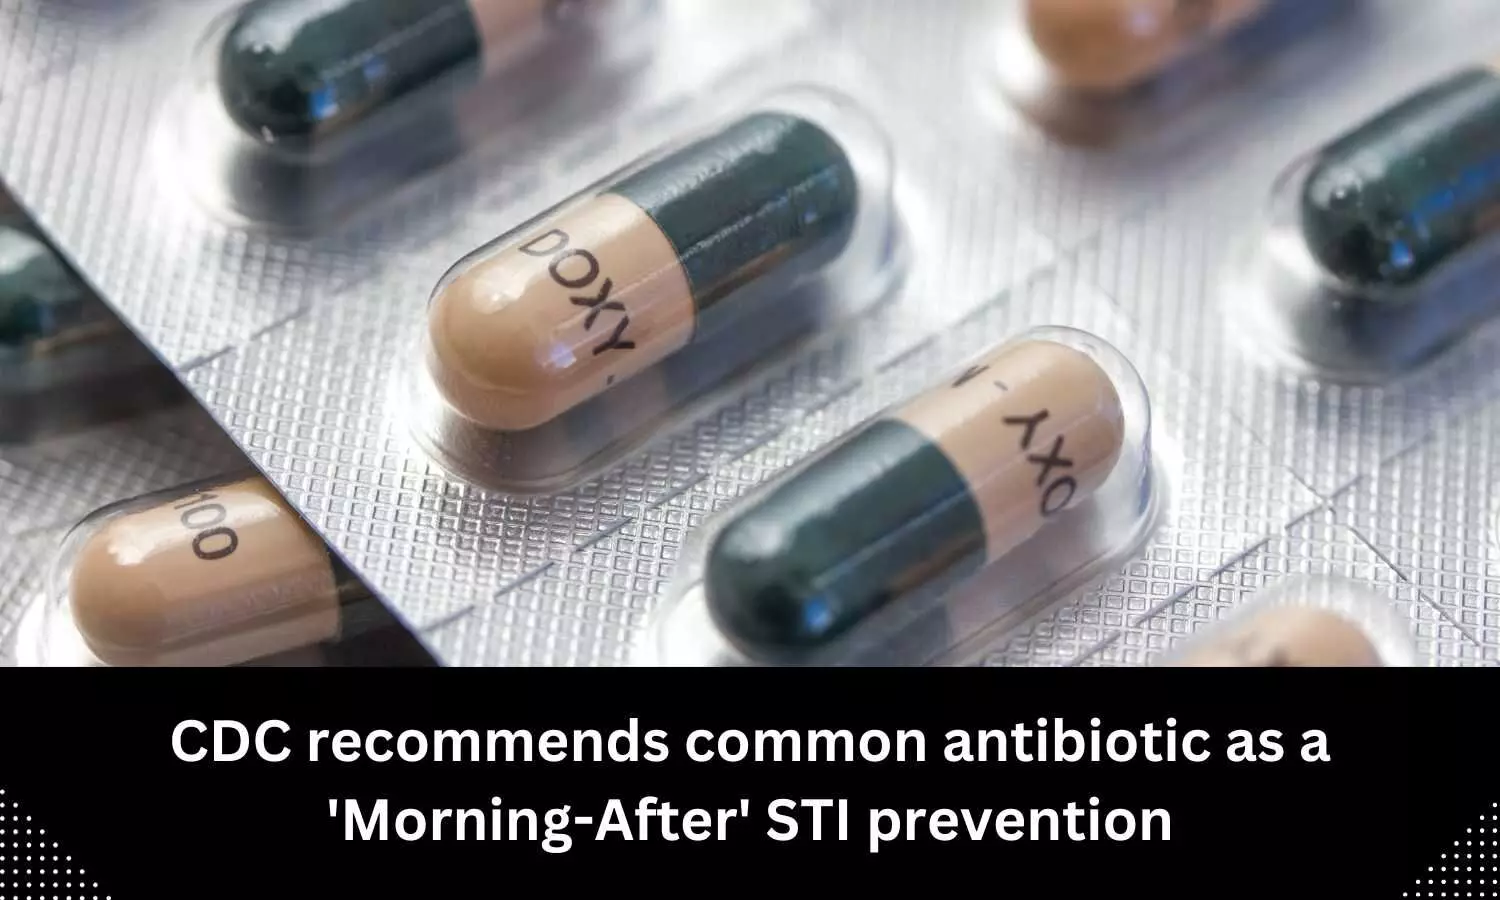 CDC recommends common antibiotic as a Morning-After STI prevention